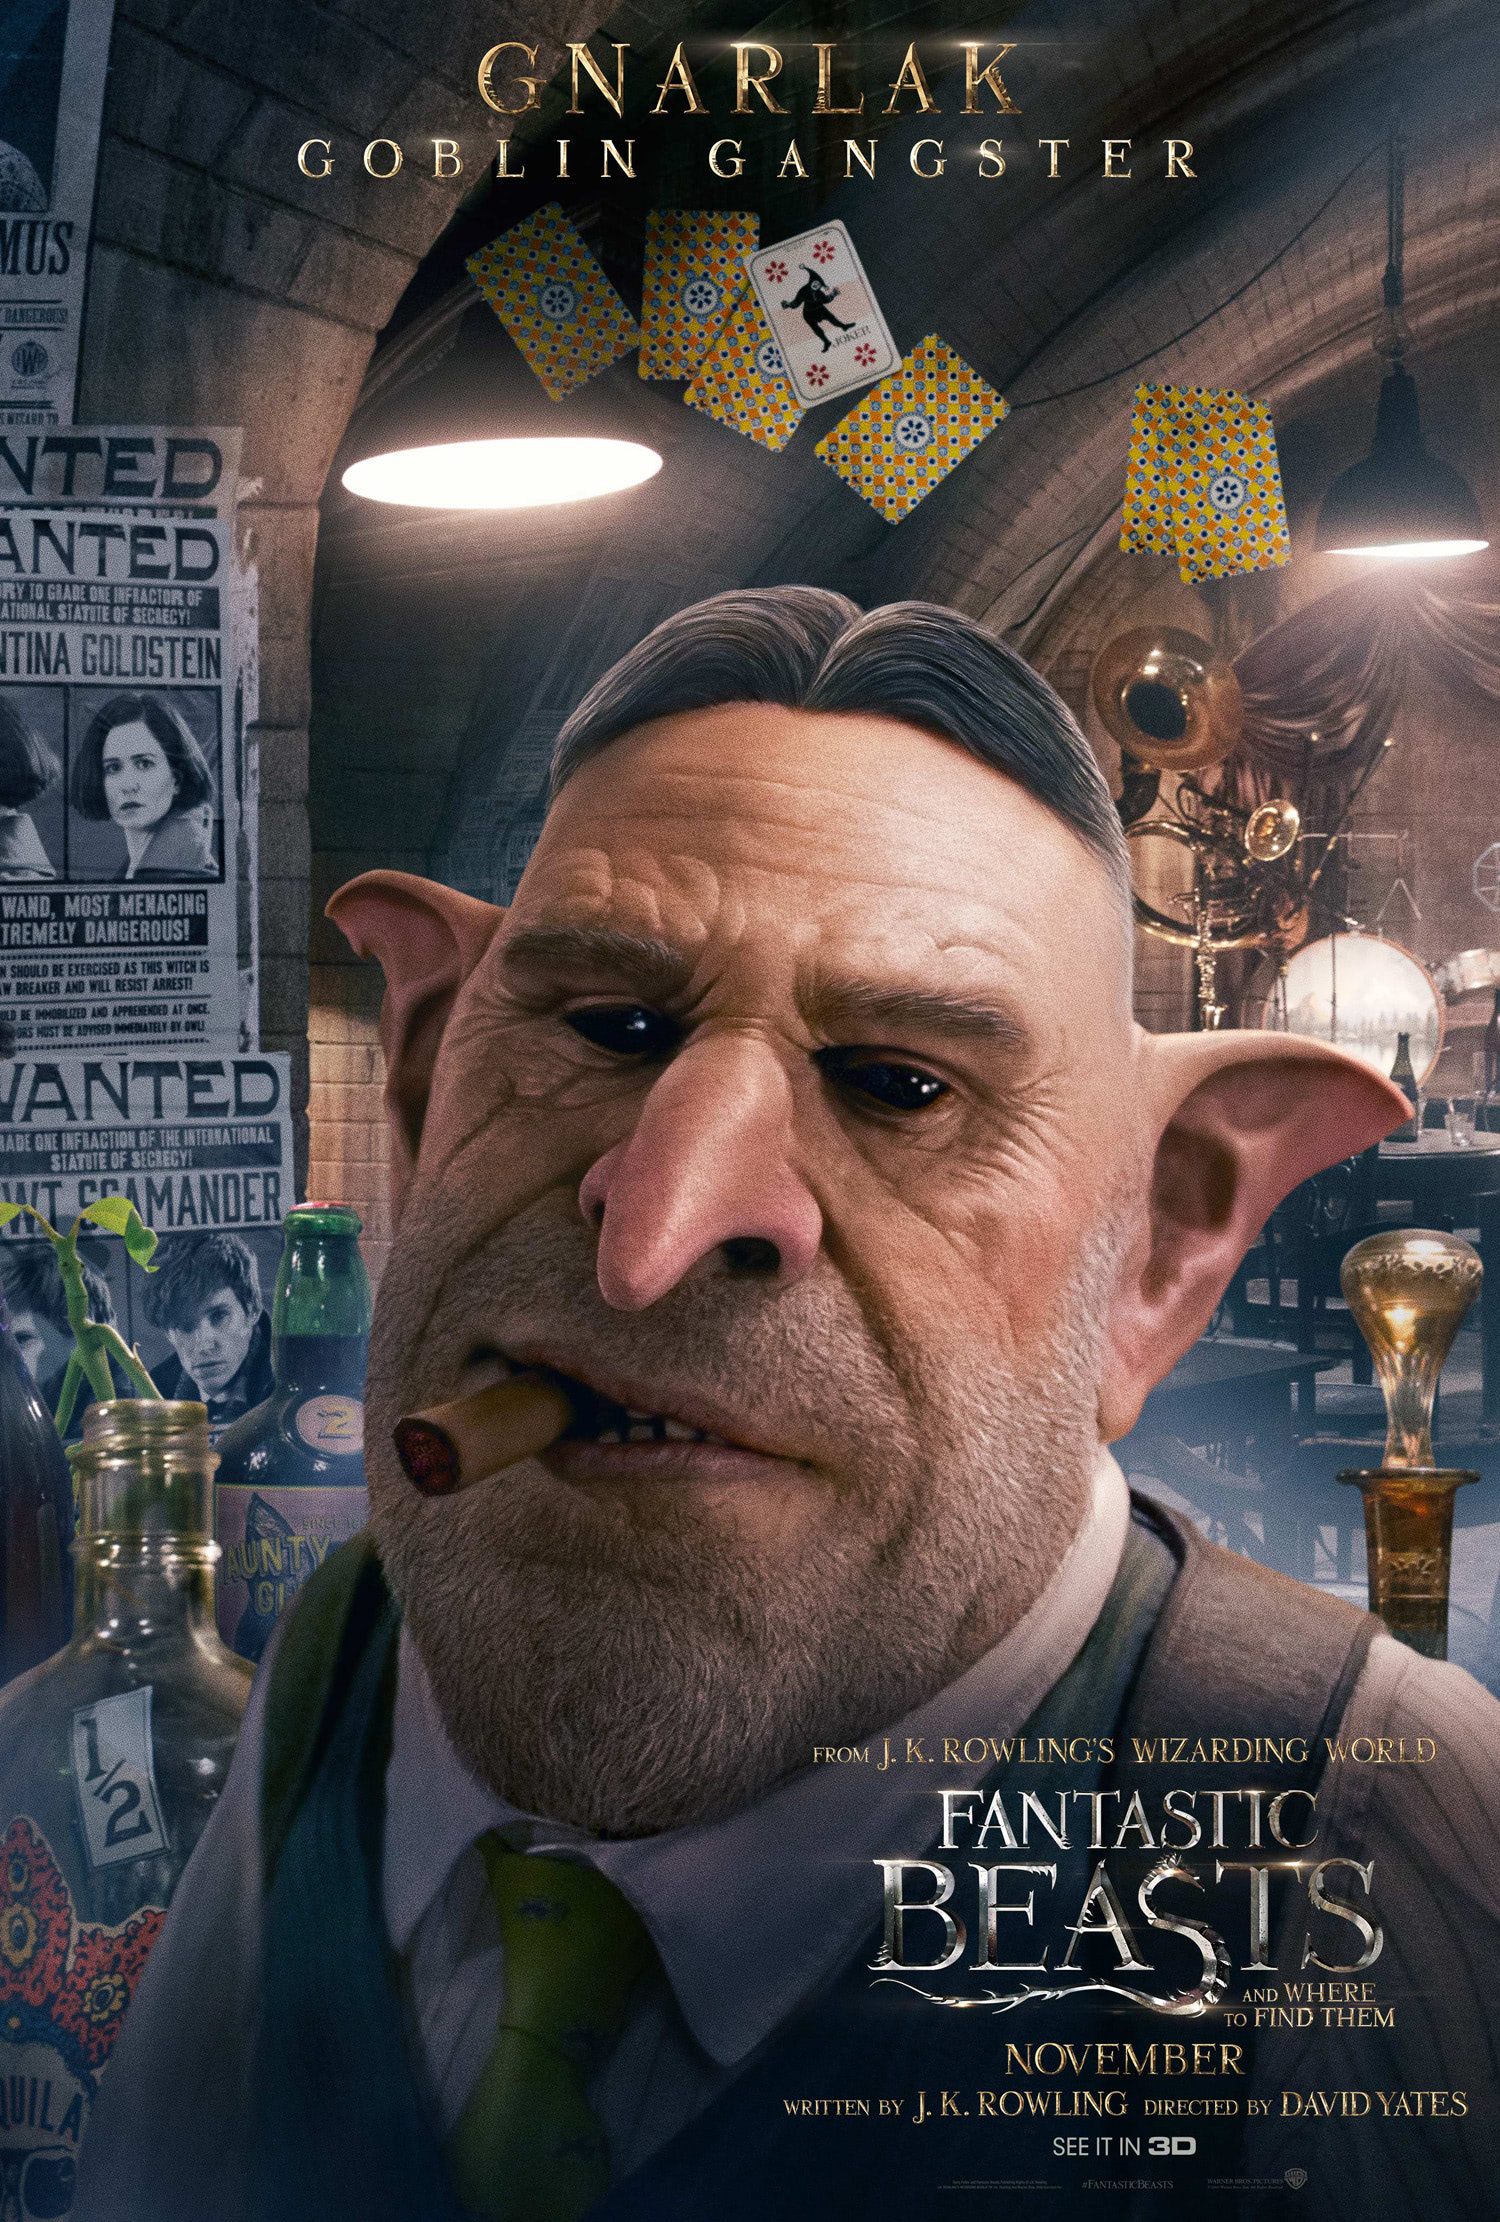 ‘Fantastic Beasts and Where to Find Them’ Gnarlak poster